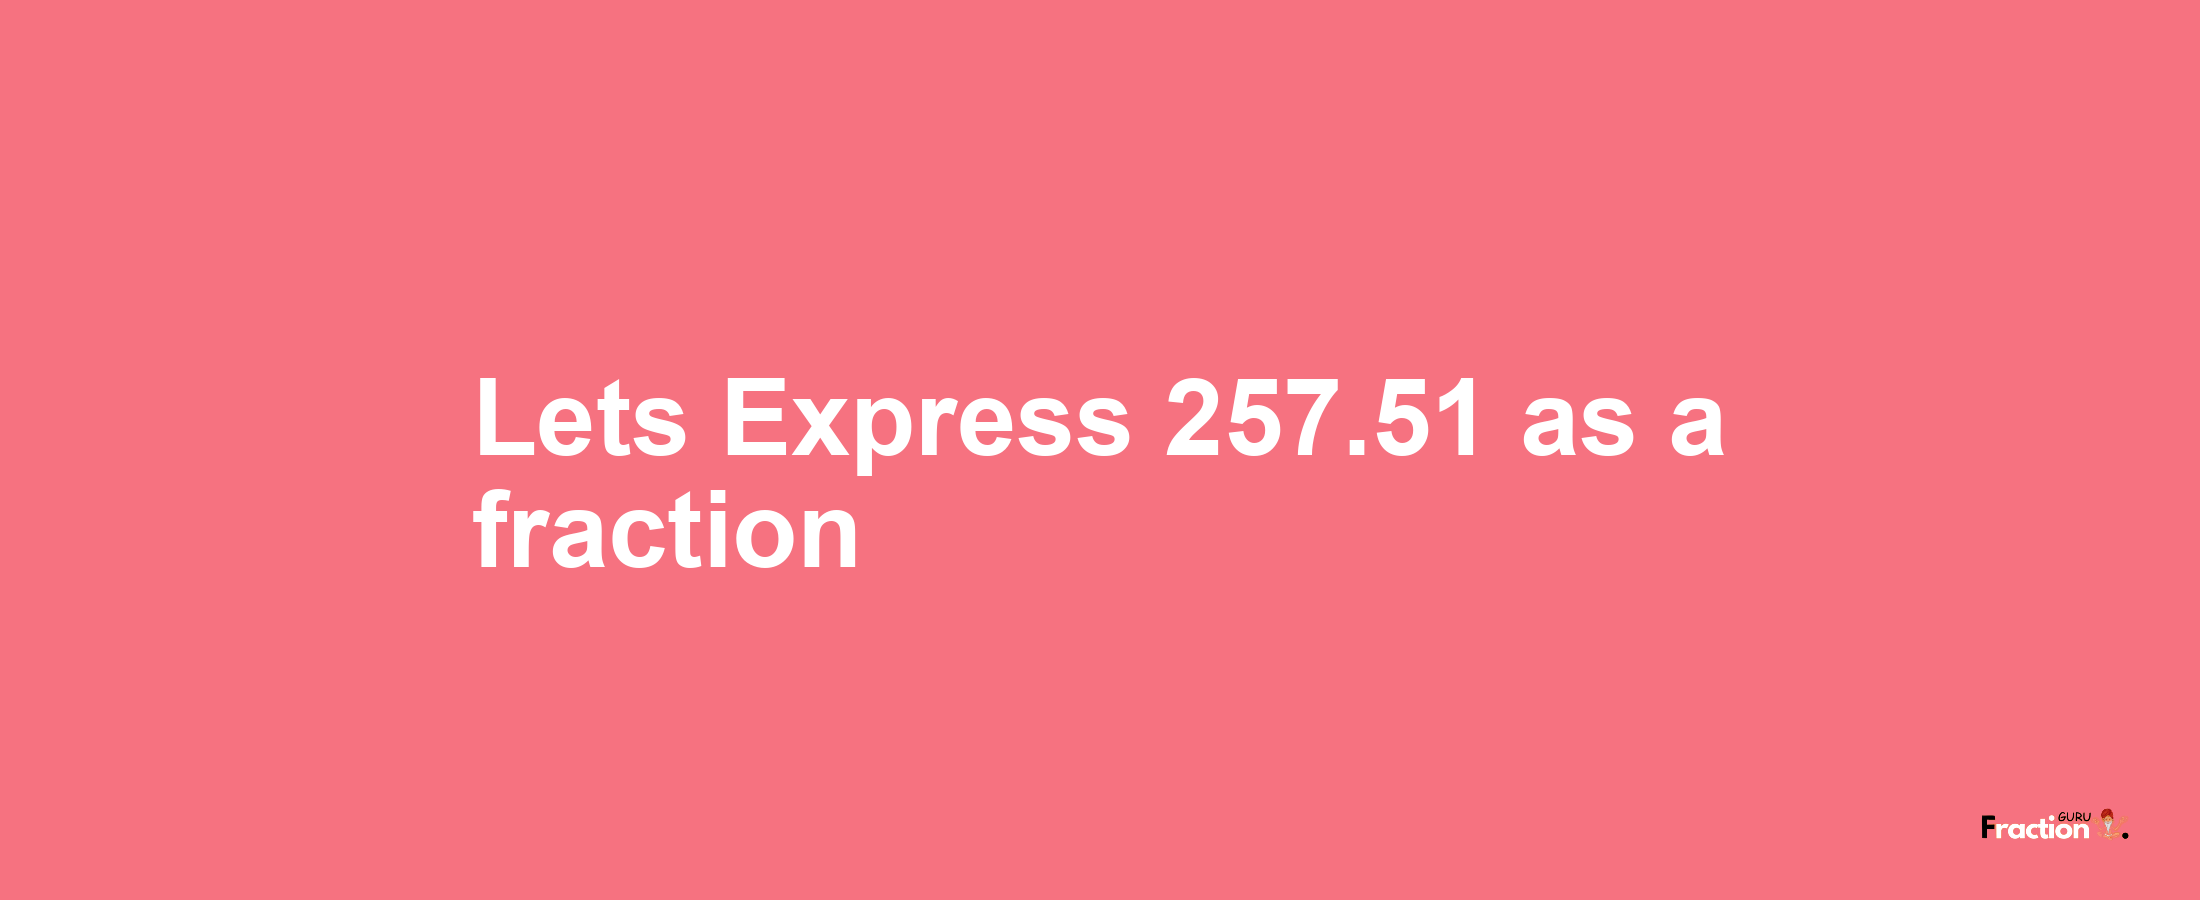 Lets Express 257.51 as afraction